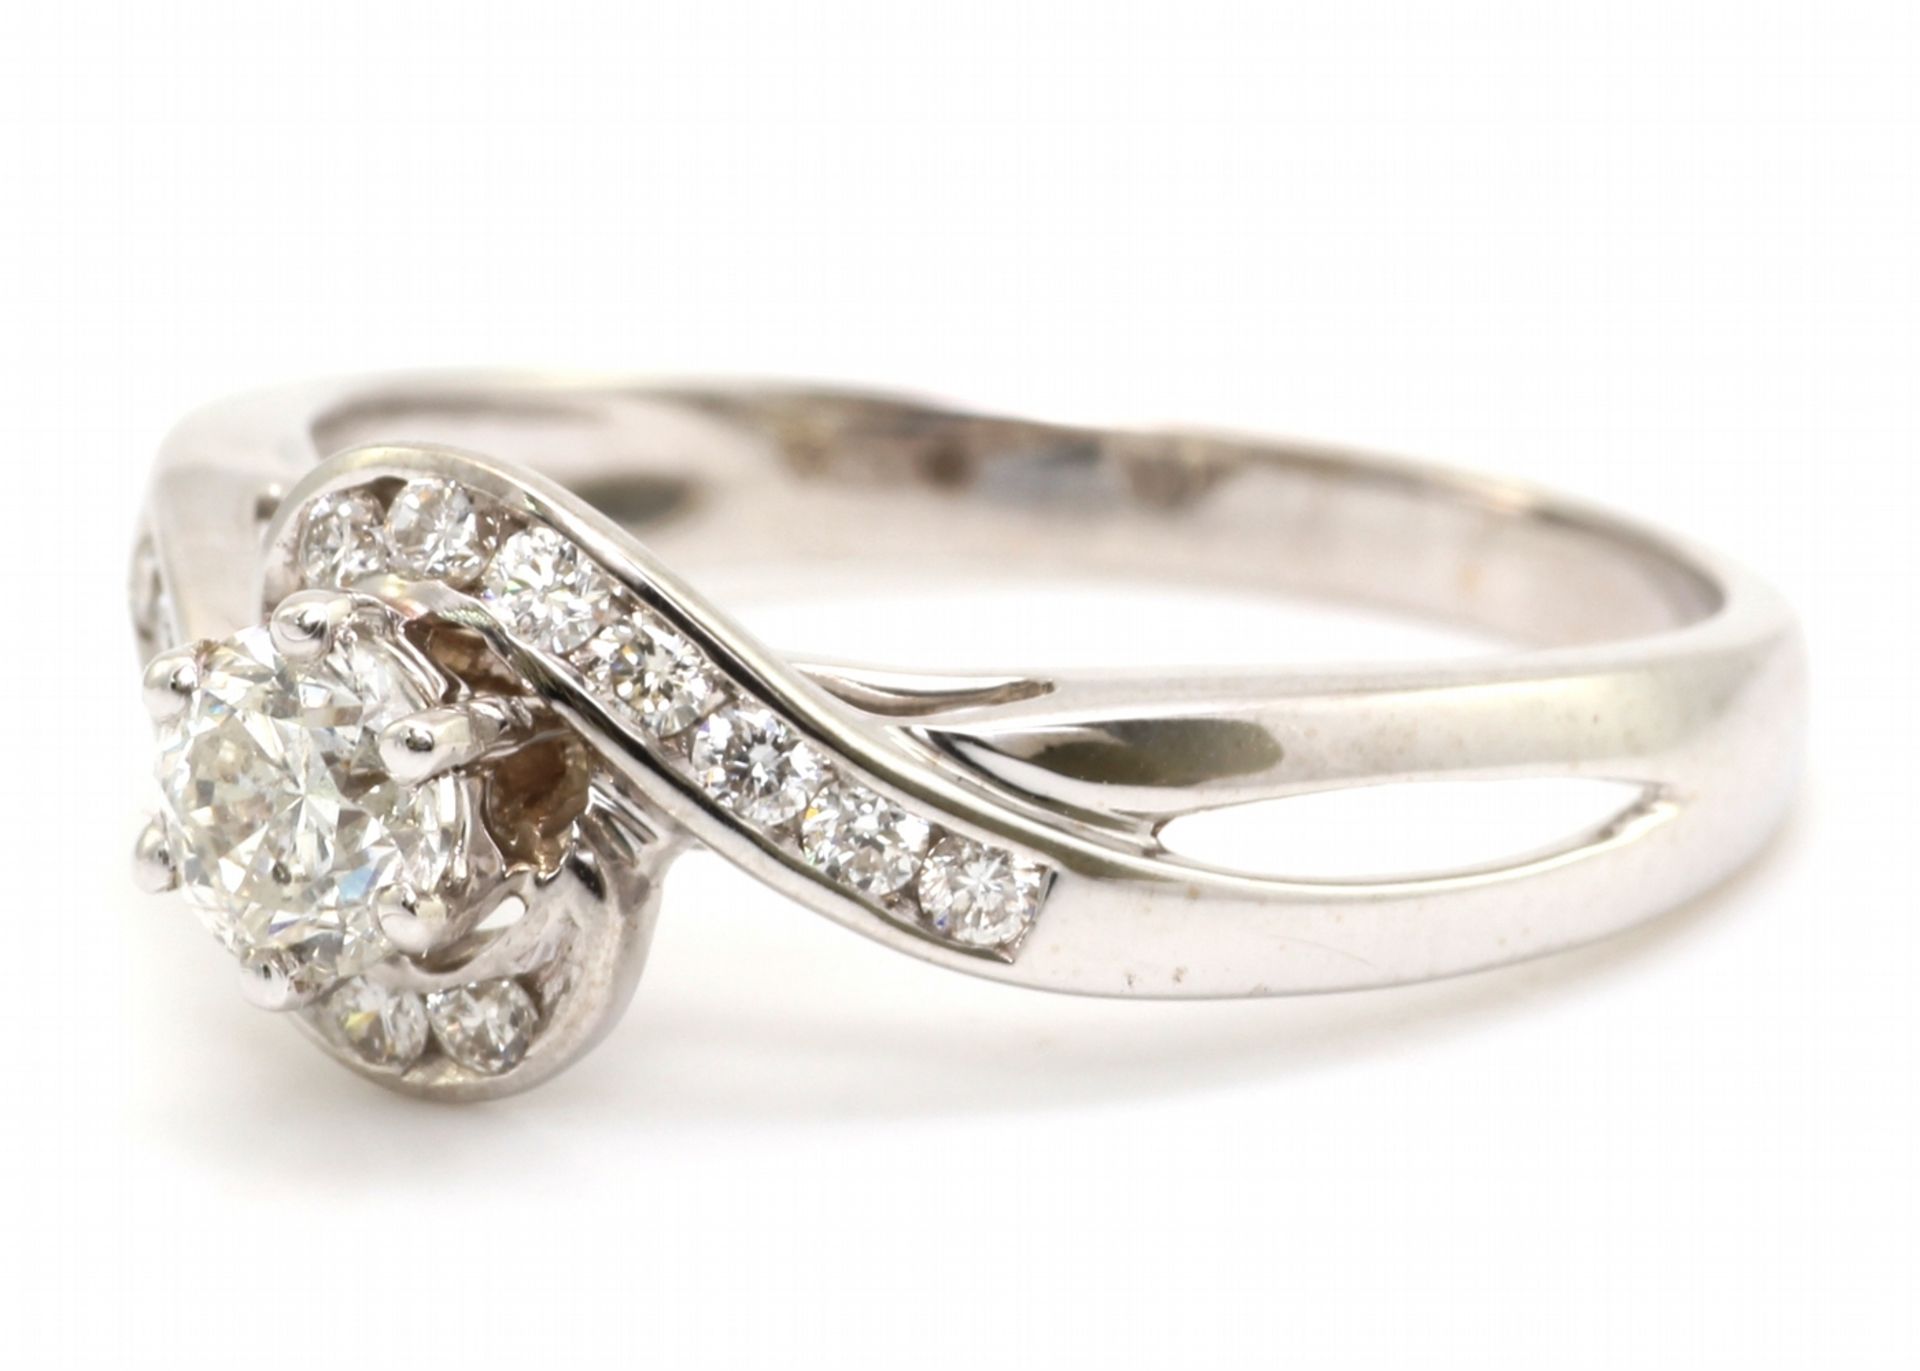 18ct White Gold Single Stone Twist Shoulders Diamond Ring 0.54 Carats - Valued by AGI £2,160.00 - - Image 2 of 4